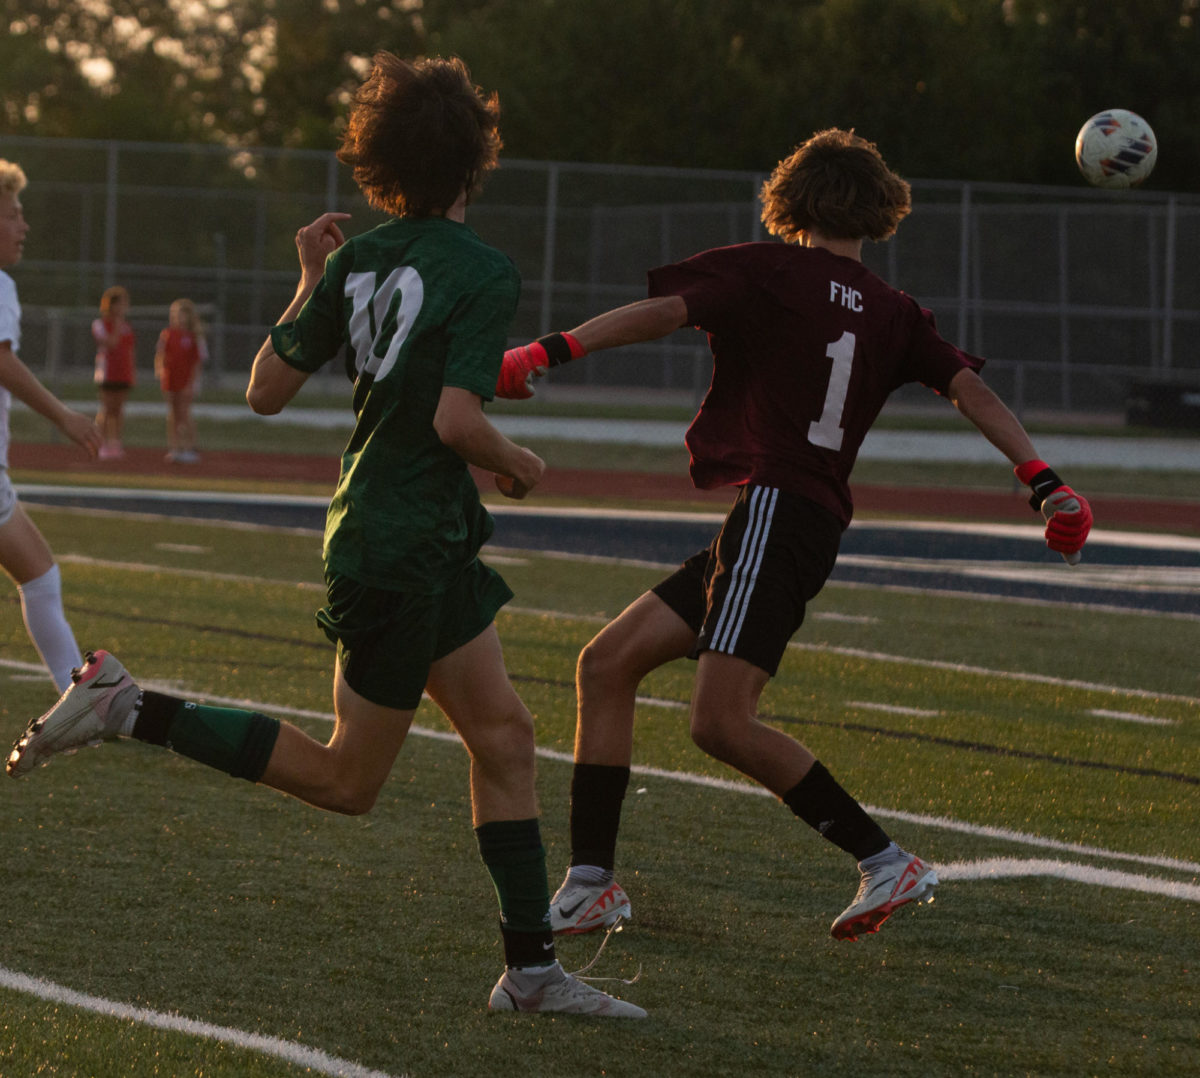 The goalie, Cooper Kambak, leaves the goal to block the opponent from getting the ball.